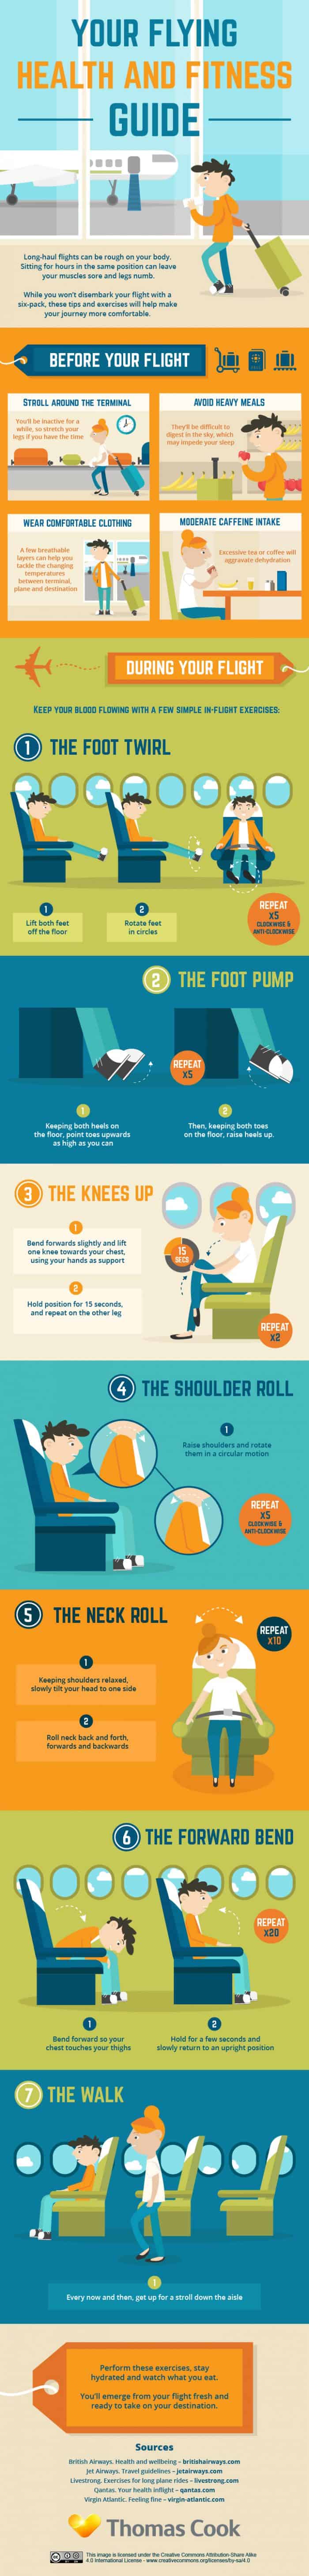 infographic describes how to stay healthy and comfortable on a long flight